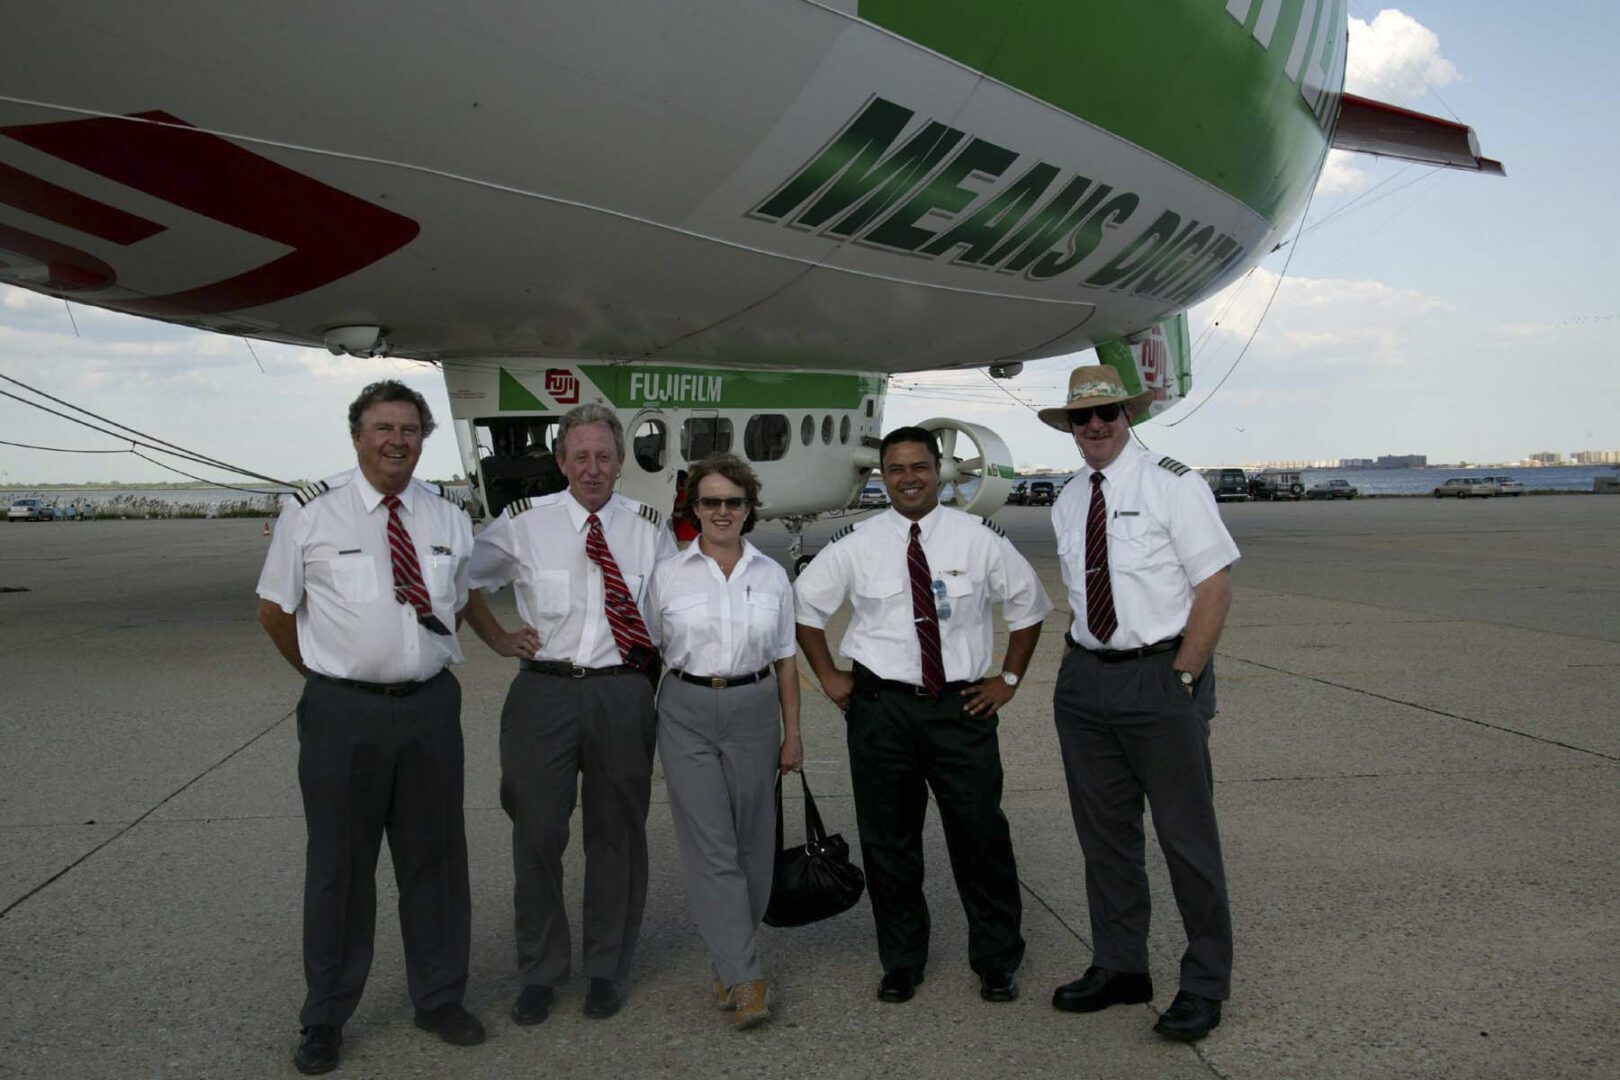 A group of people standing under an airplane.